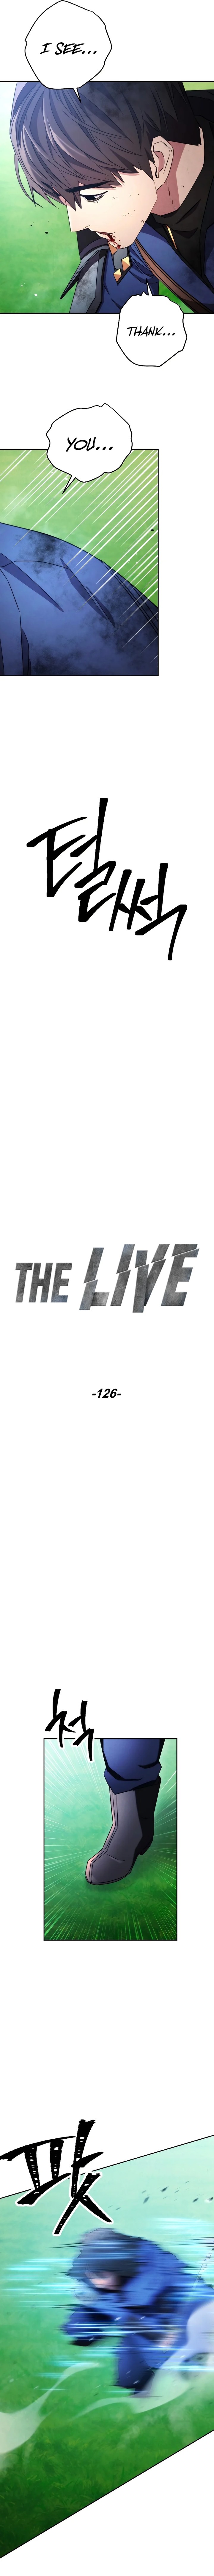 the_live_126_5